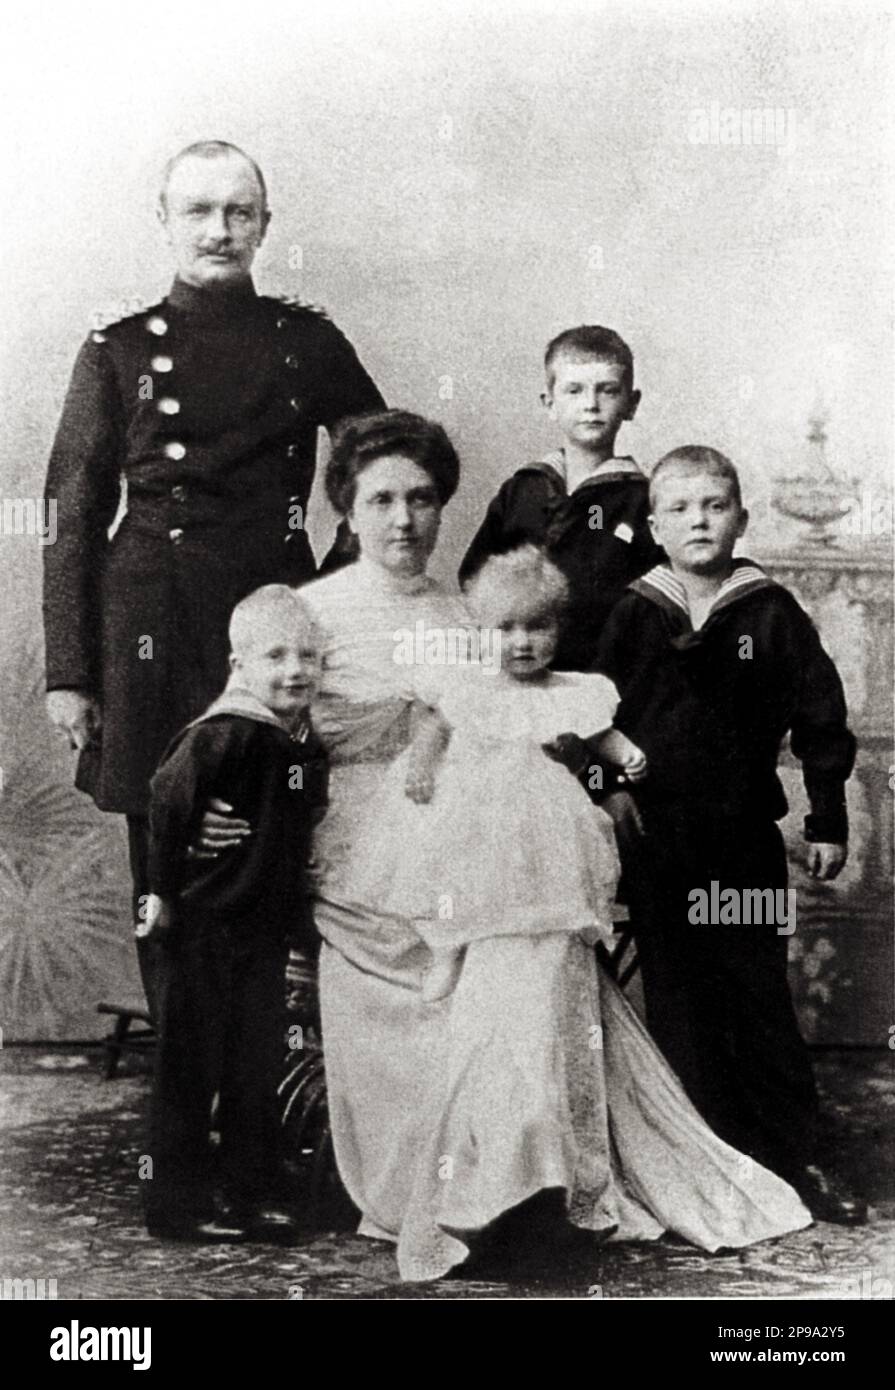 1901 : The german King of SACHSEN FRIEDRICH AUGUST III ( Frederick Augustus , 1865 - 1932 ) the scandalous wife ,  austrian princess LUISA VON TOSCANA ( Luise , Louise von Osterreich - Toskana  , Salzburg 1870 – Bruxelles 1947  ). In this photo with  4 sons : Friedrich August Georg ( 1893 - 1943 ), Friedrich Christian Duke of Saxony ( 1893 - 1968 , later married Princess Elisabeth Helene of Thurn and Taxis ), Ernst Heinrich ( 1896 - 1971 , married first Princess Sophia of Luxembourg ), Margarete Carola Wilhelmine ( 1900 - 1962 , married Friedrich, Prince of Hohenzollern )  - GERMANIA - GERMANY Stock Photo